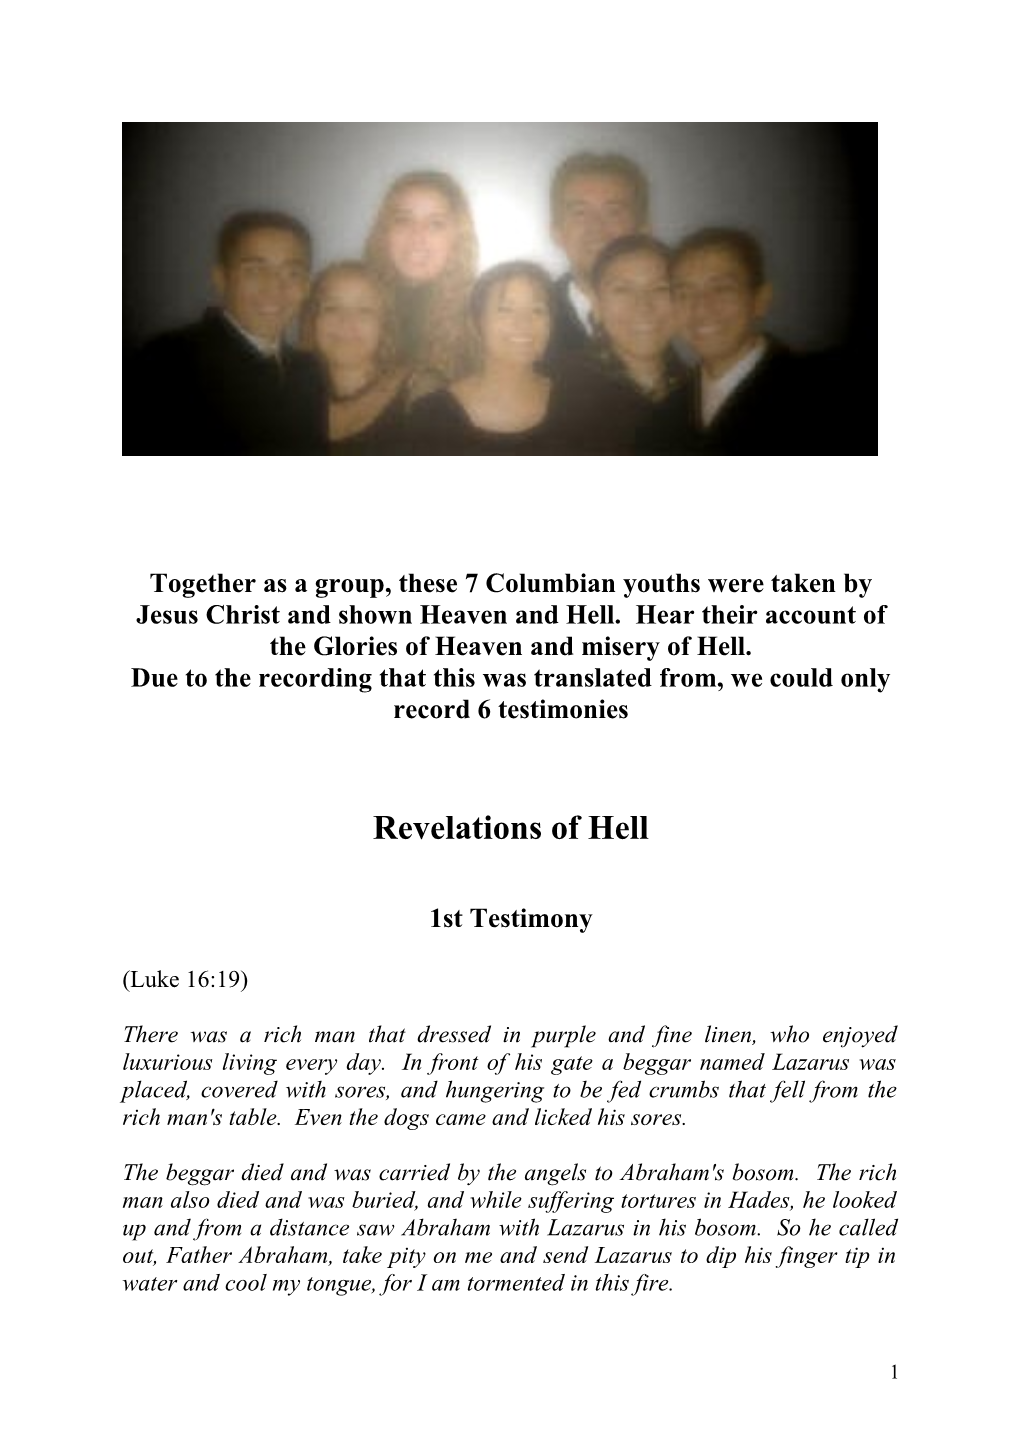 Together As a Group, These 7 Columbian Youths Were Taken by Jesus Christ and Shown Heaven